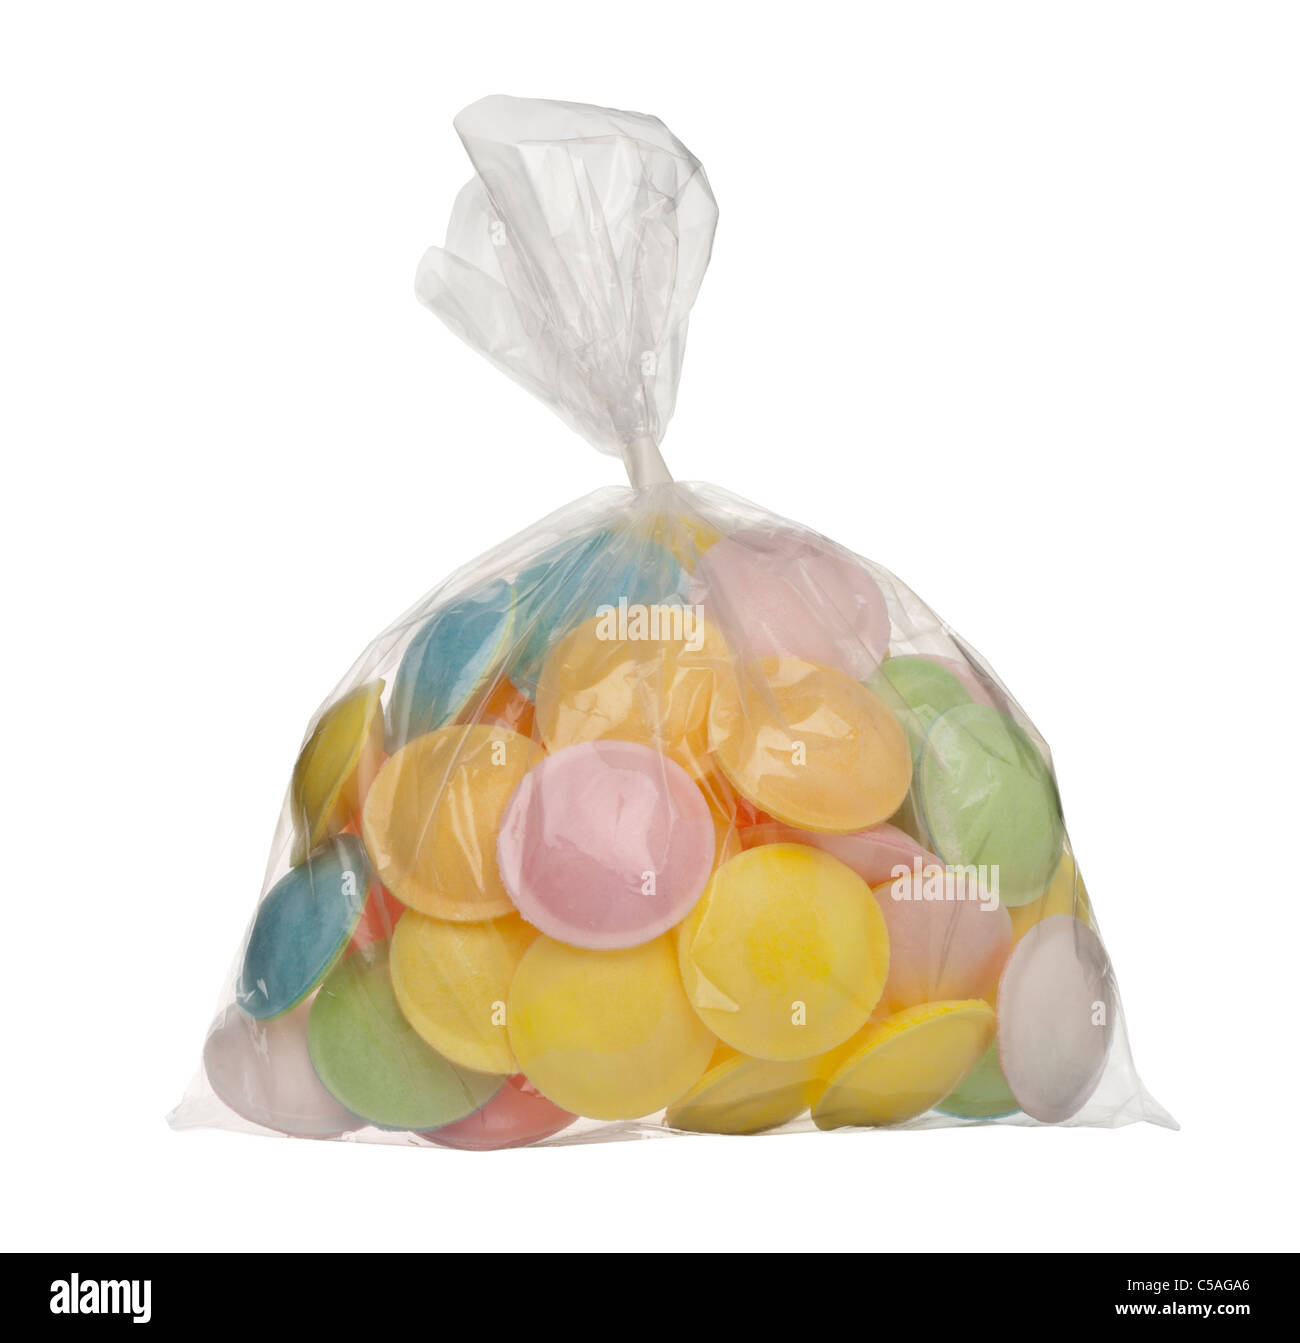 Bag of flying saucer sherbet sweets or candies Stock Photo